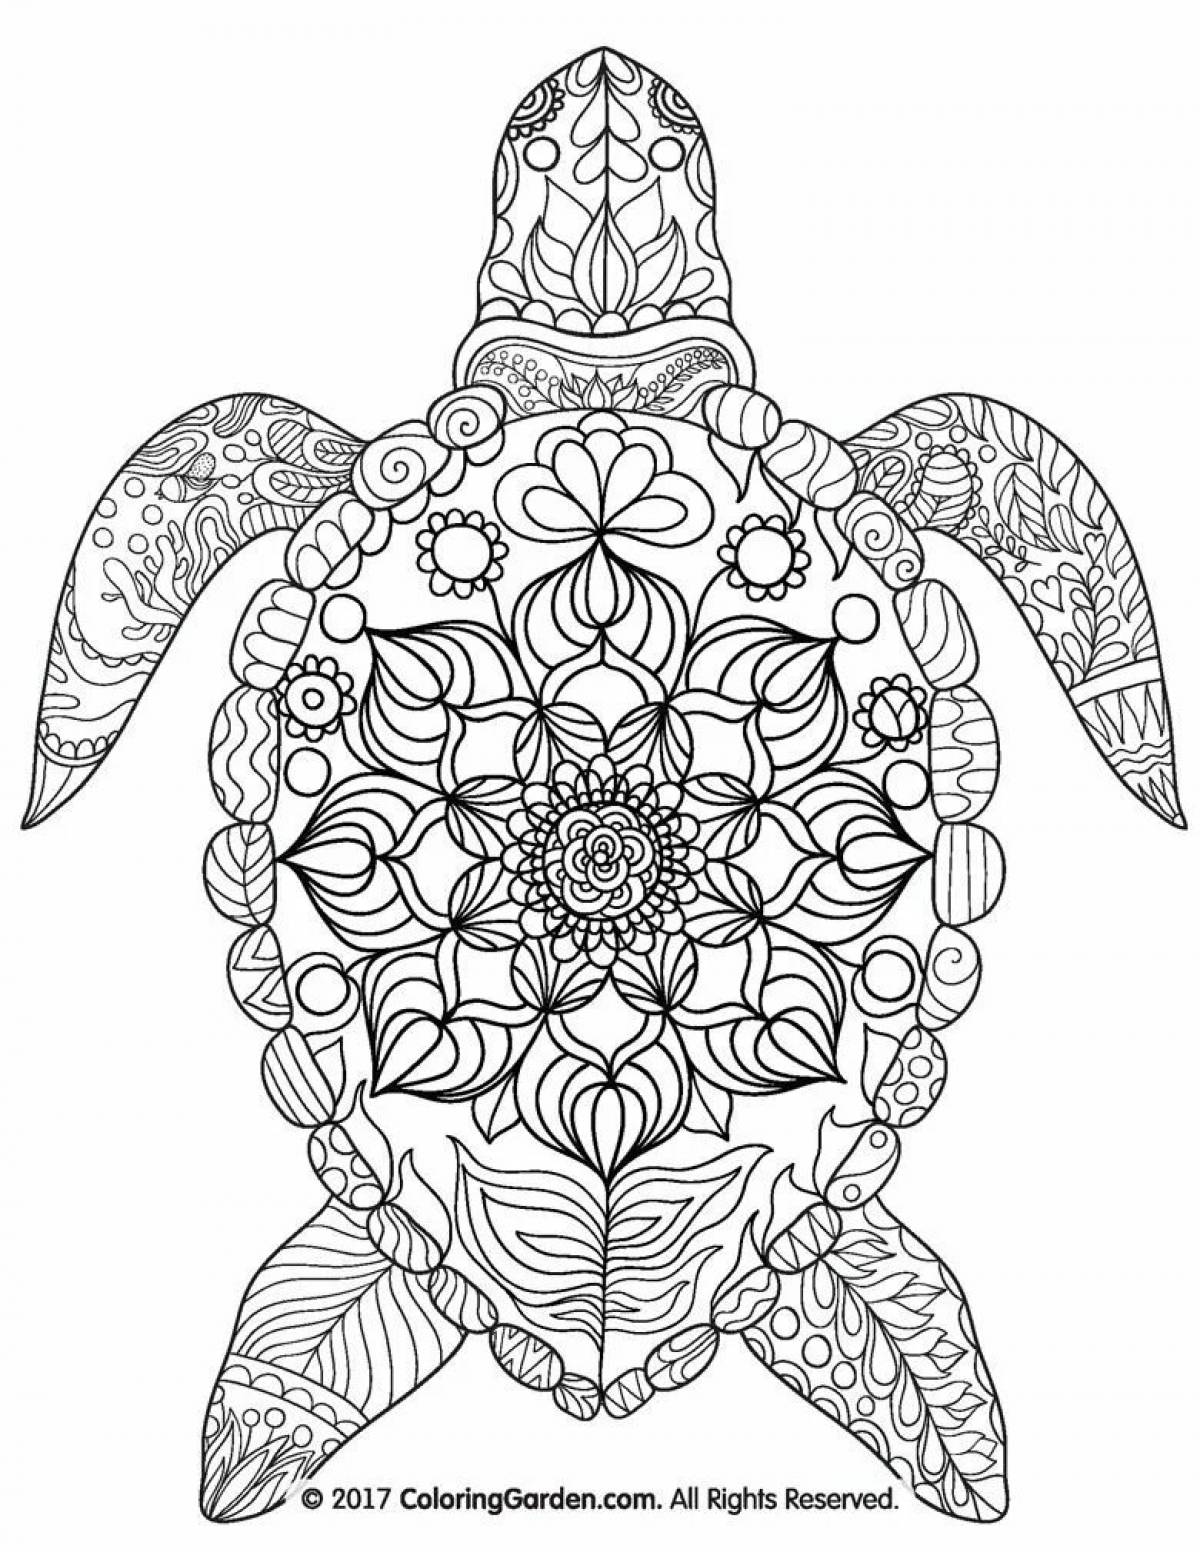 Ethereal coloring for meditation